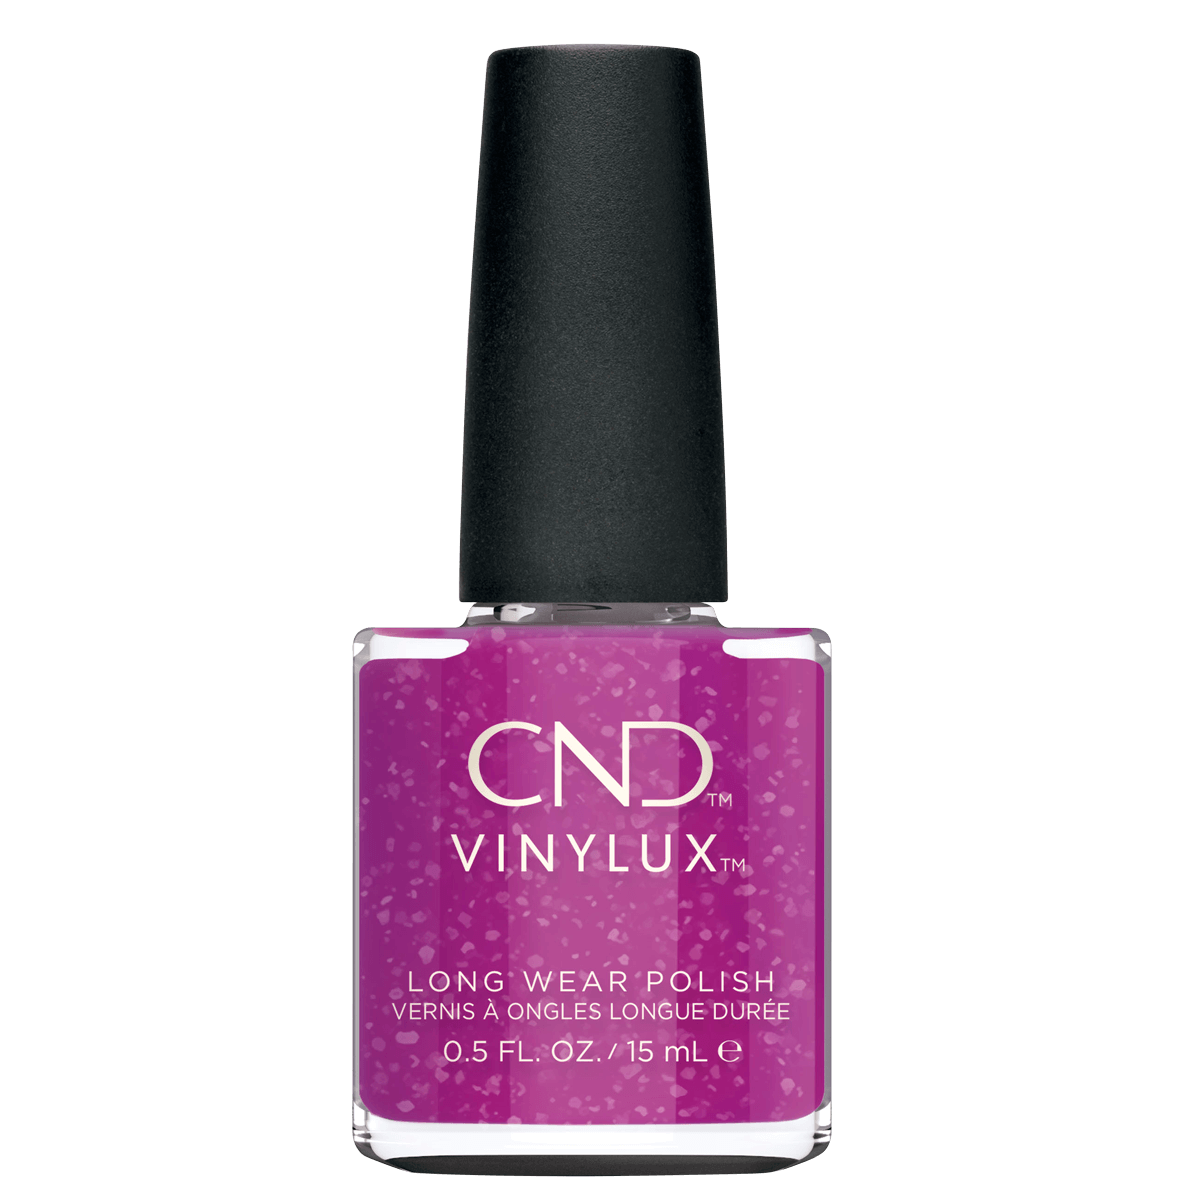 Vinylux CND Vernis à Ongles #443 All the Rage 15mL